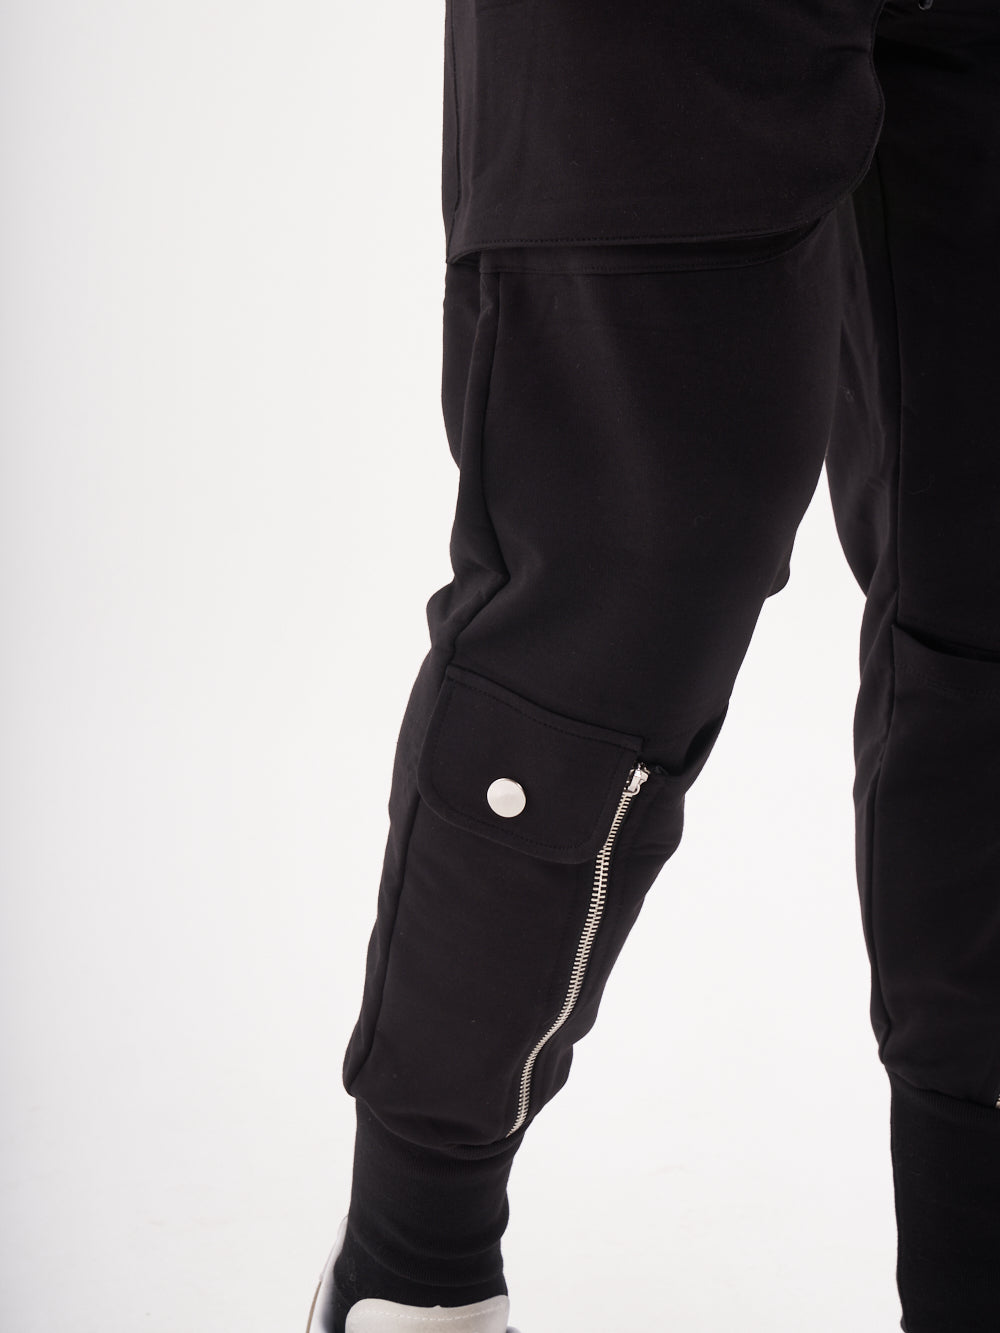 A man wearing a pair of GUERRILLA | BLACK jogging pants with zippers.